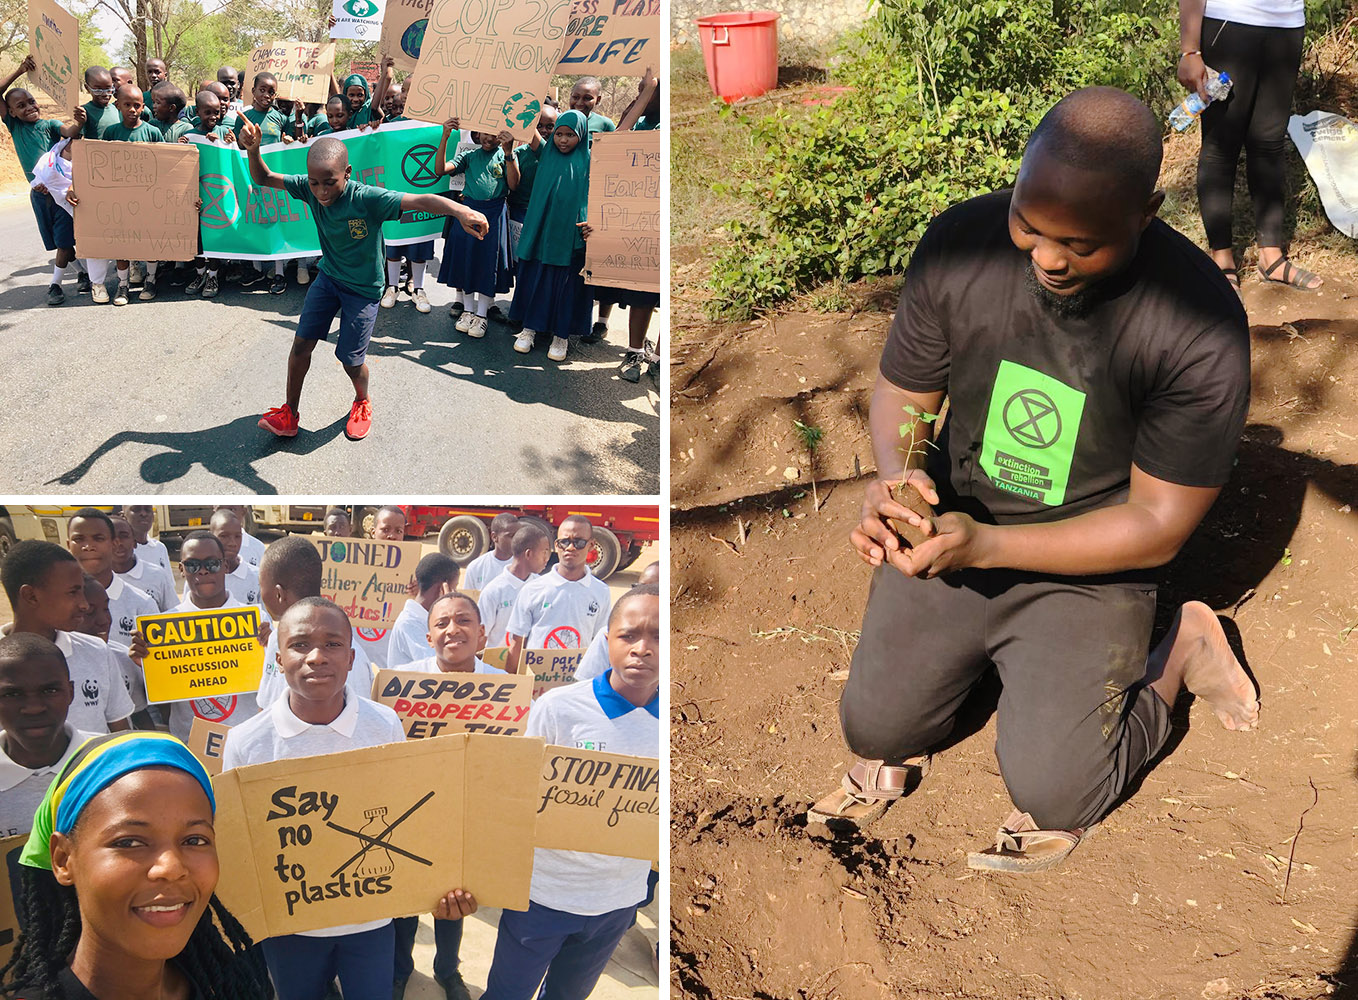 A school boy dances in front of his classmates on a march, a rebel kneels in the soil as he carefully plants a tree sapling, students march with signs about banning plastic